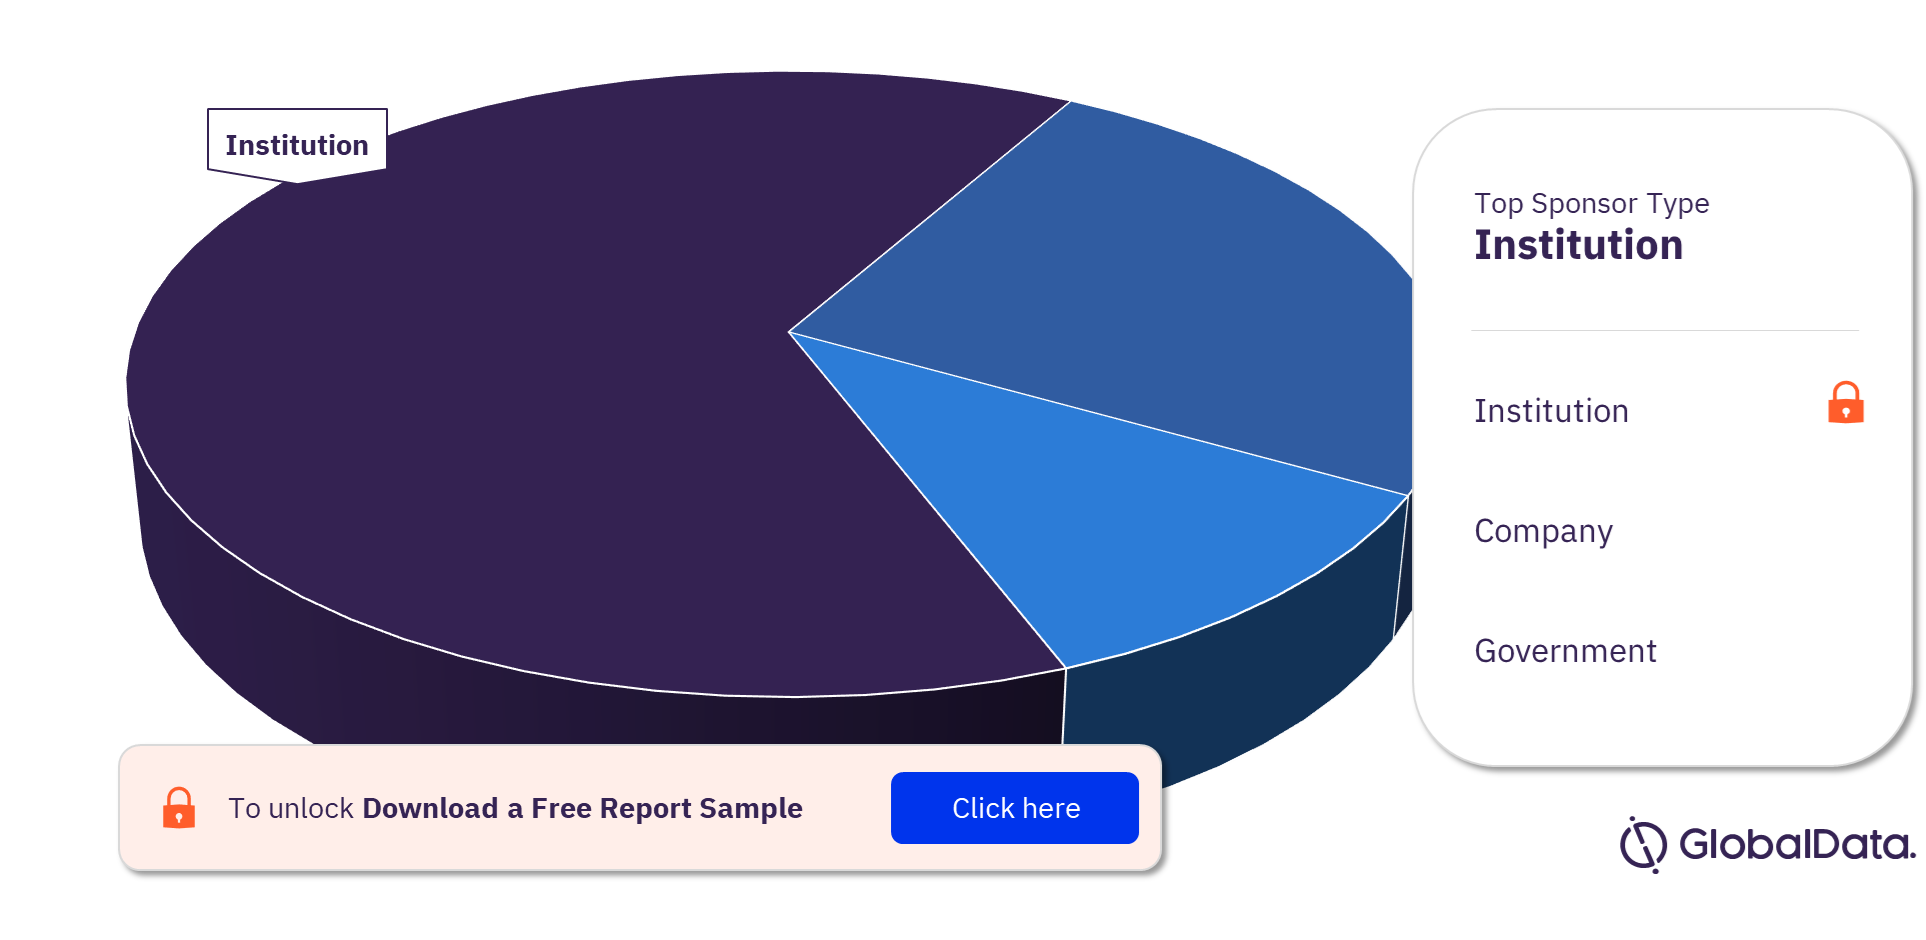 Hyperglycemia Clinical Trials Market Analysis by Sponsor Types, 2023 (%)